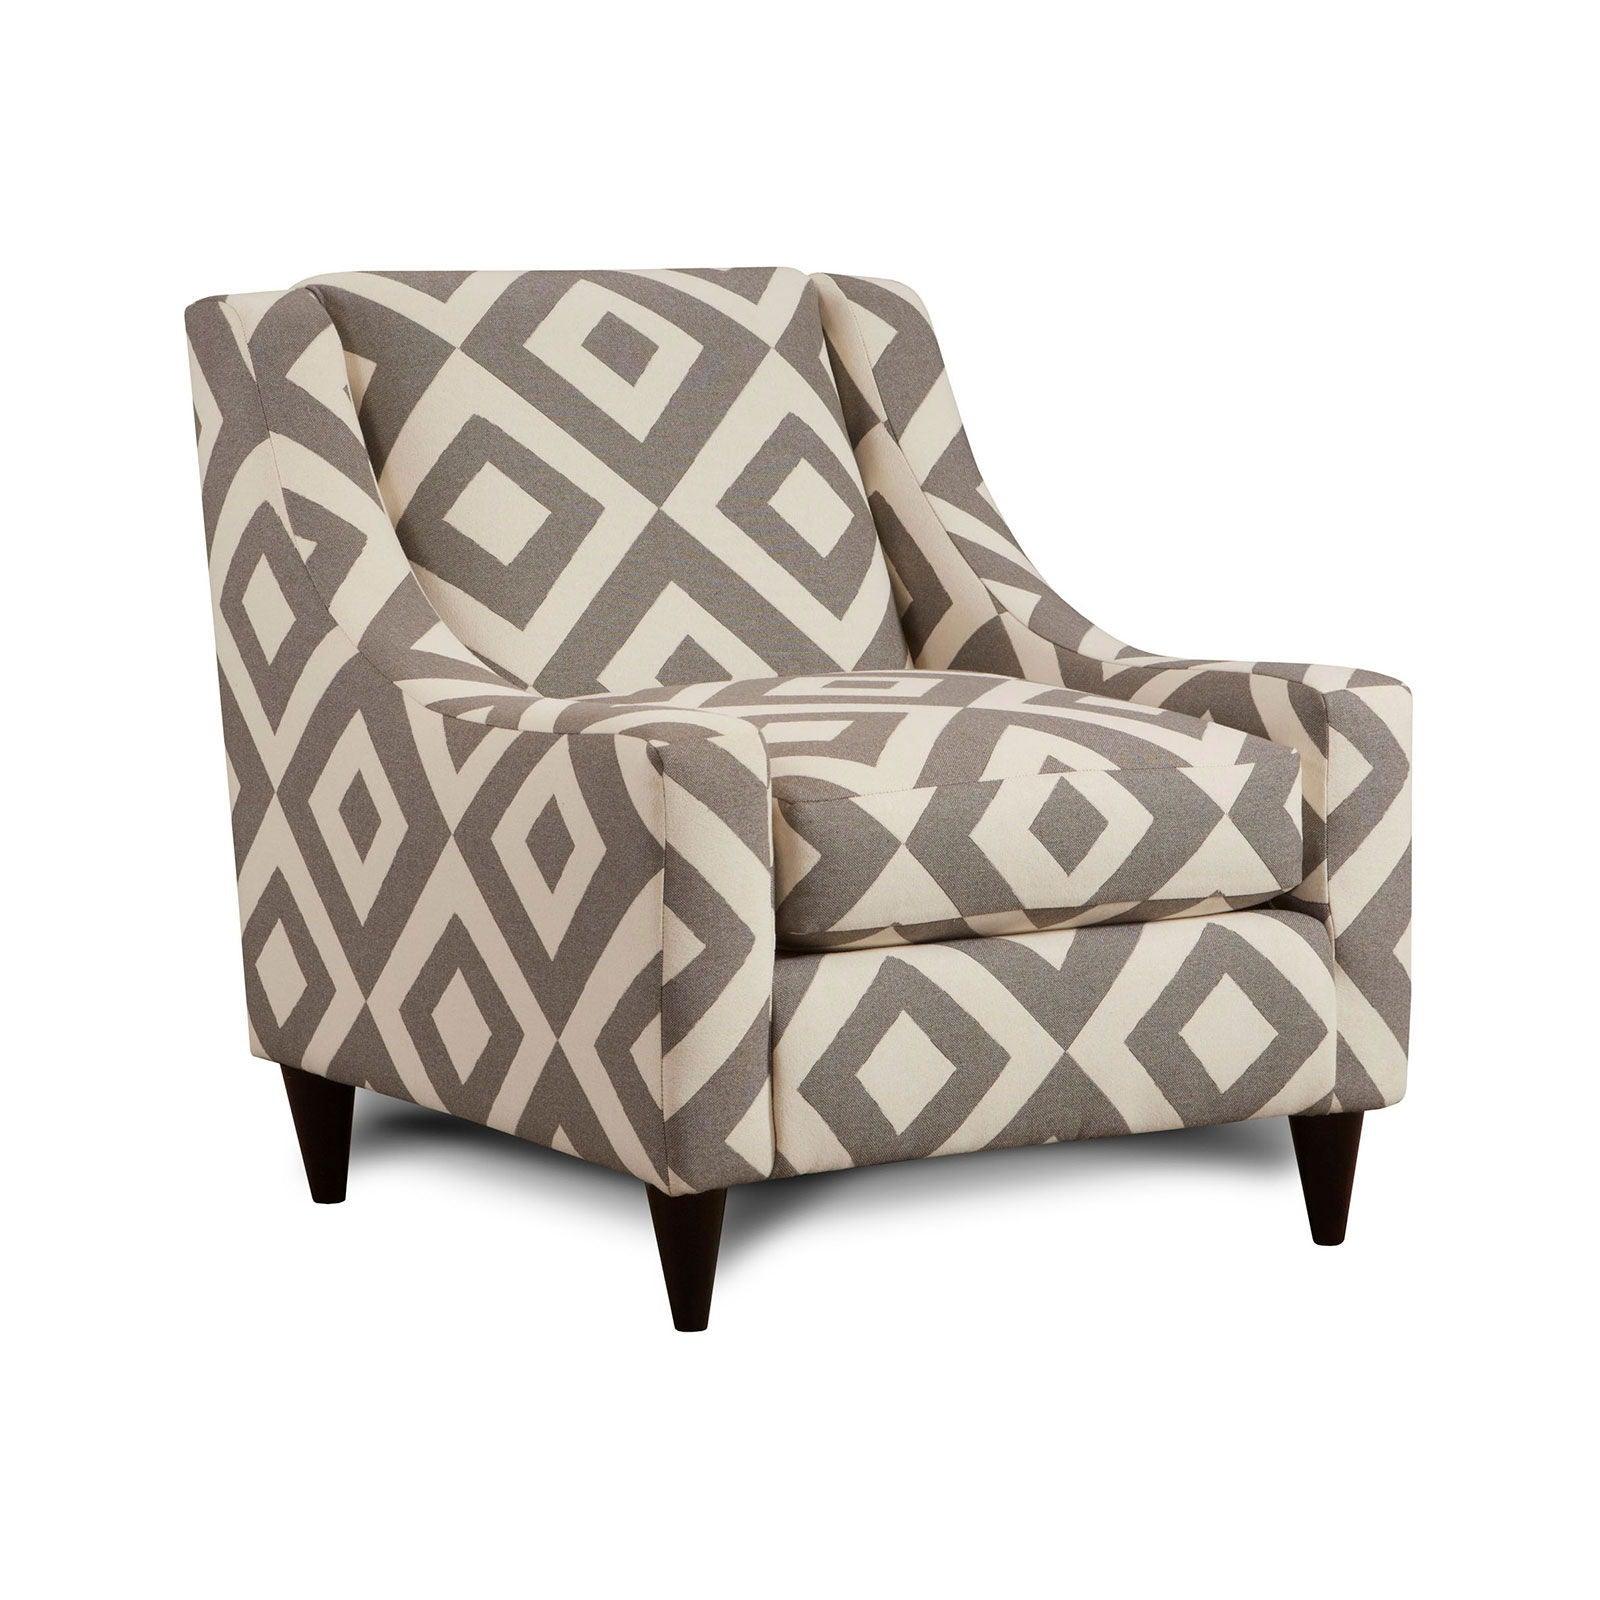 Furniture of America - Parker - Chair - Gray / Pattern Fabric - 5th Avenue Furniture